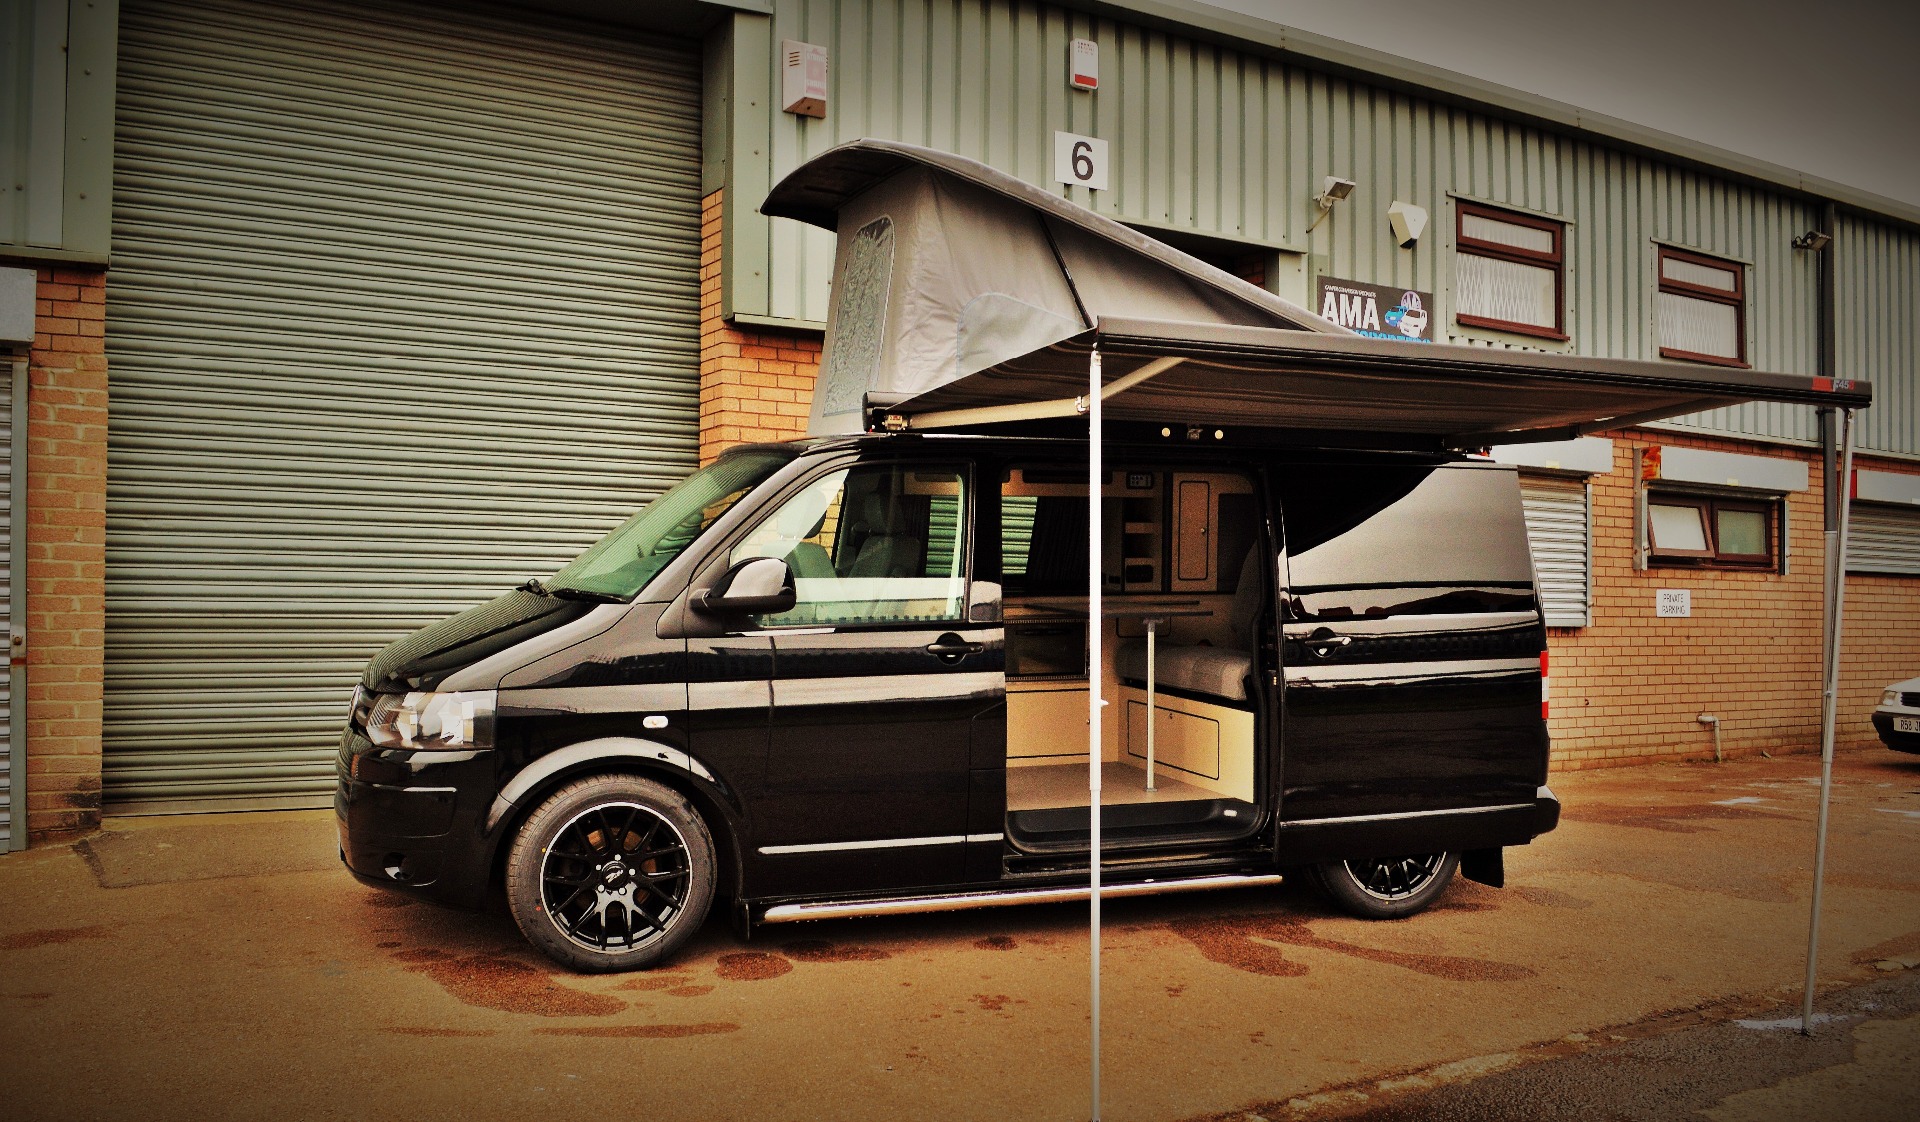 With Fiamma F45s awning and Austop Elevating roof.